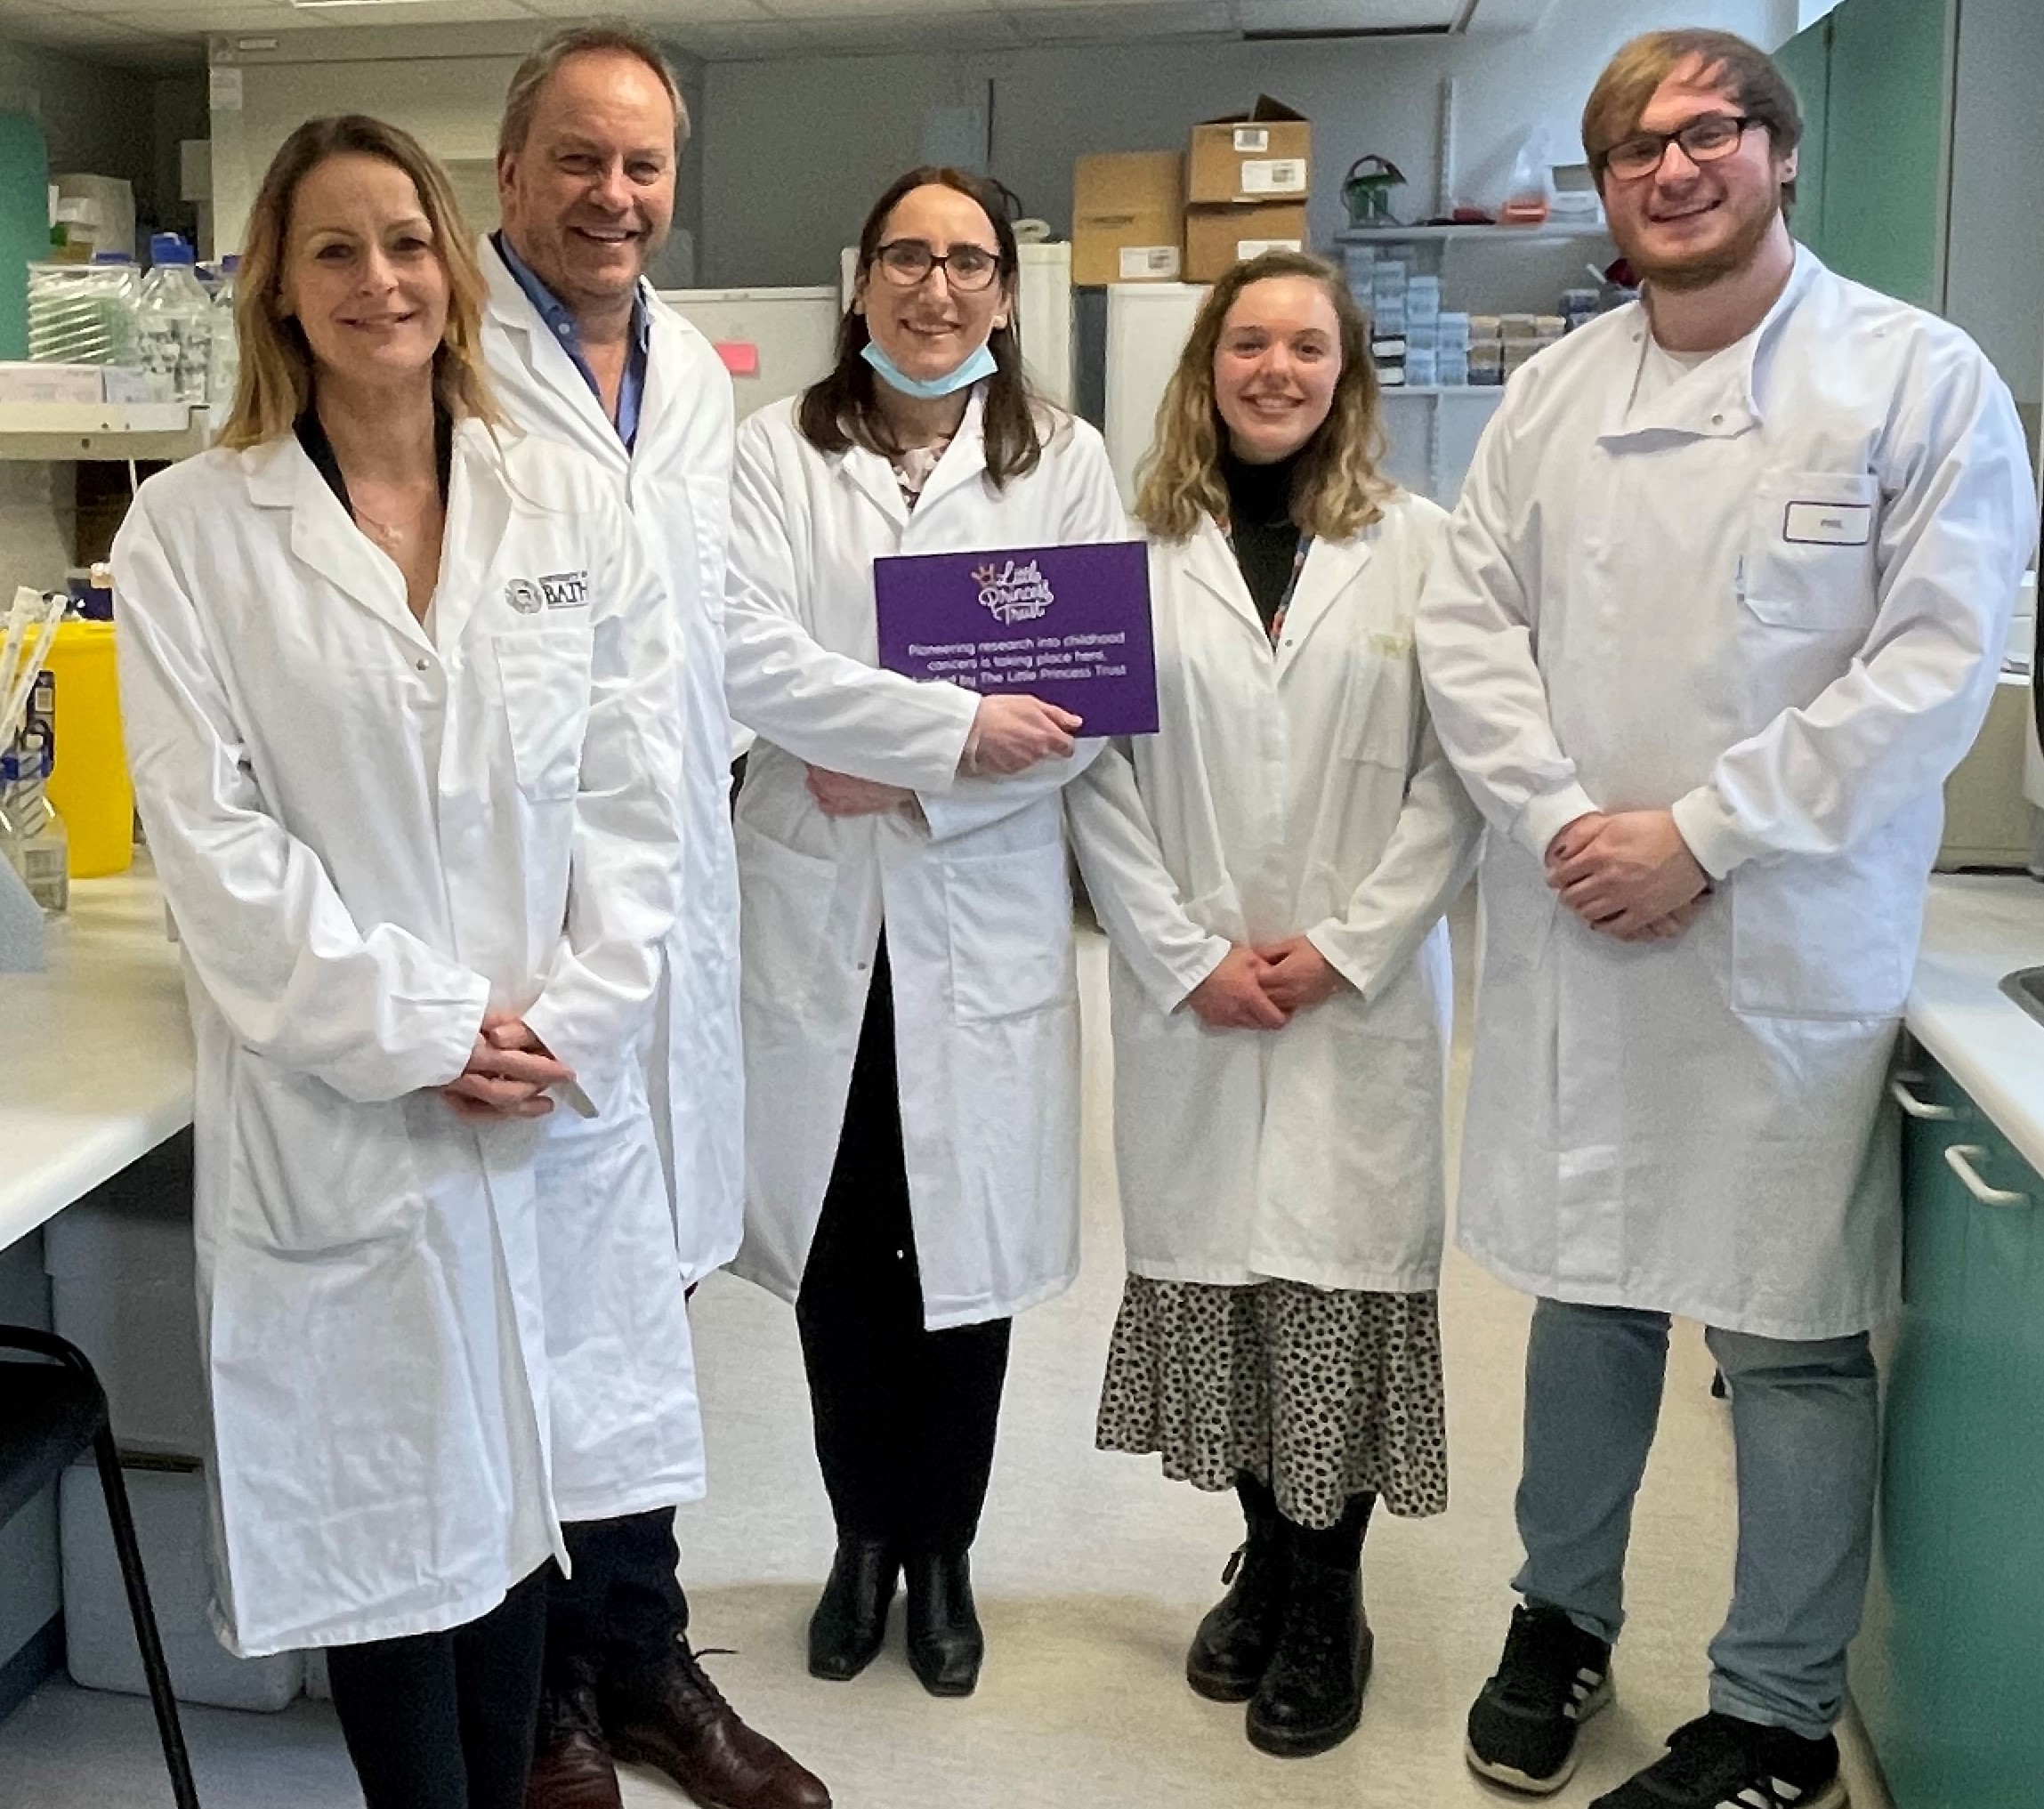 Wendy Tarplee-Morris (left) and Phil Brace (second left) meet Dr Maria Victoria Nikilson Chirou and her team in the lab at the University of Bath.